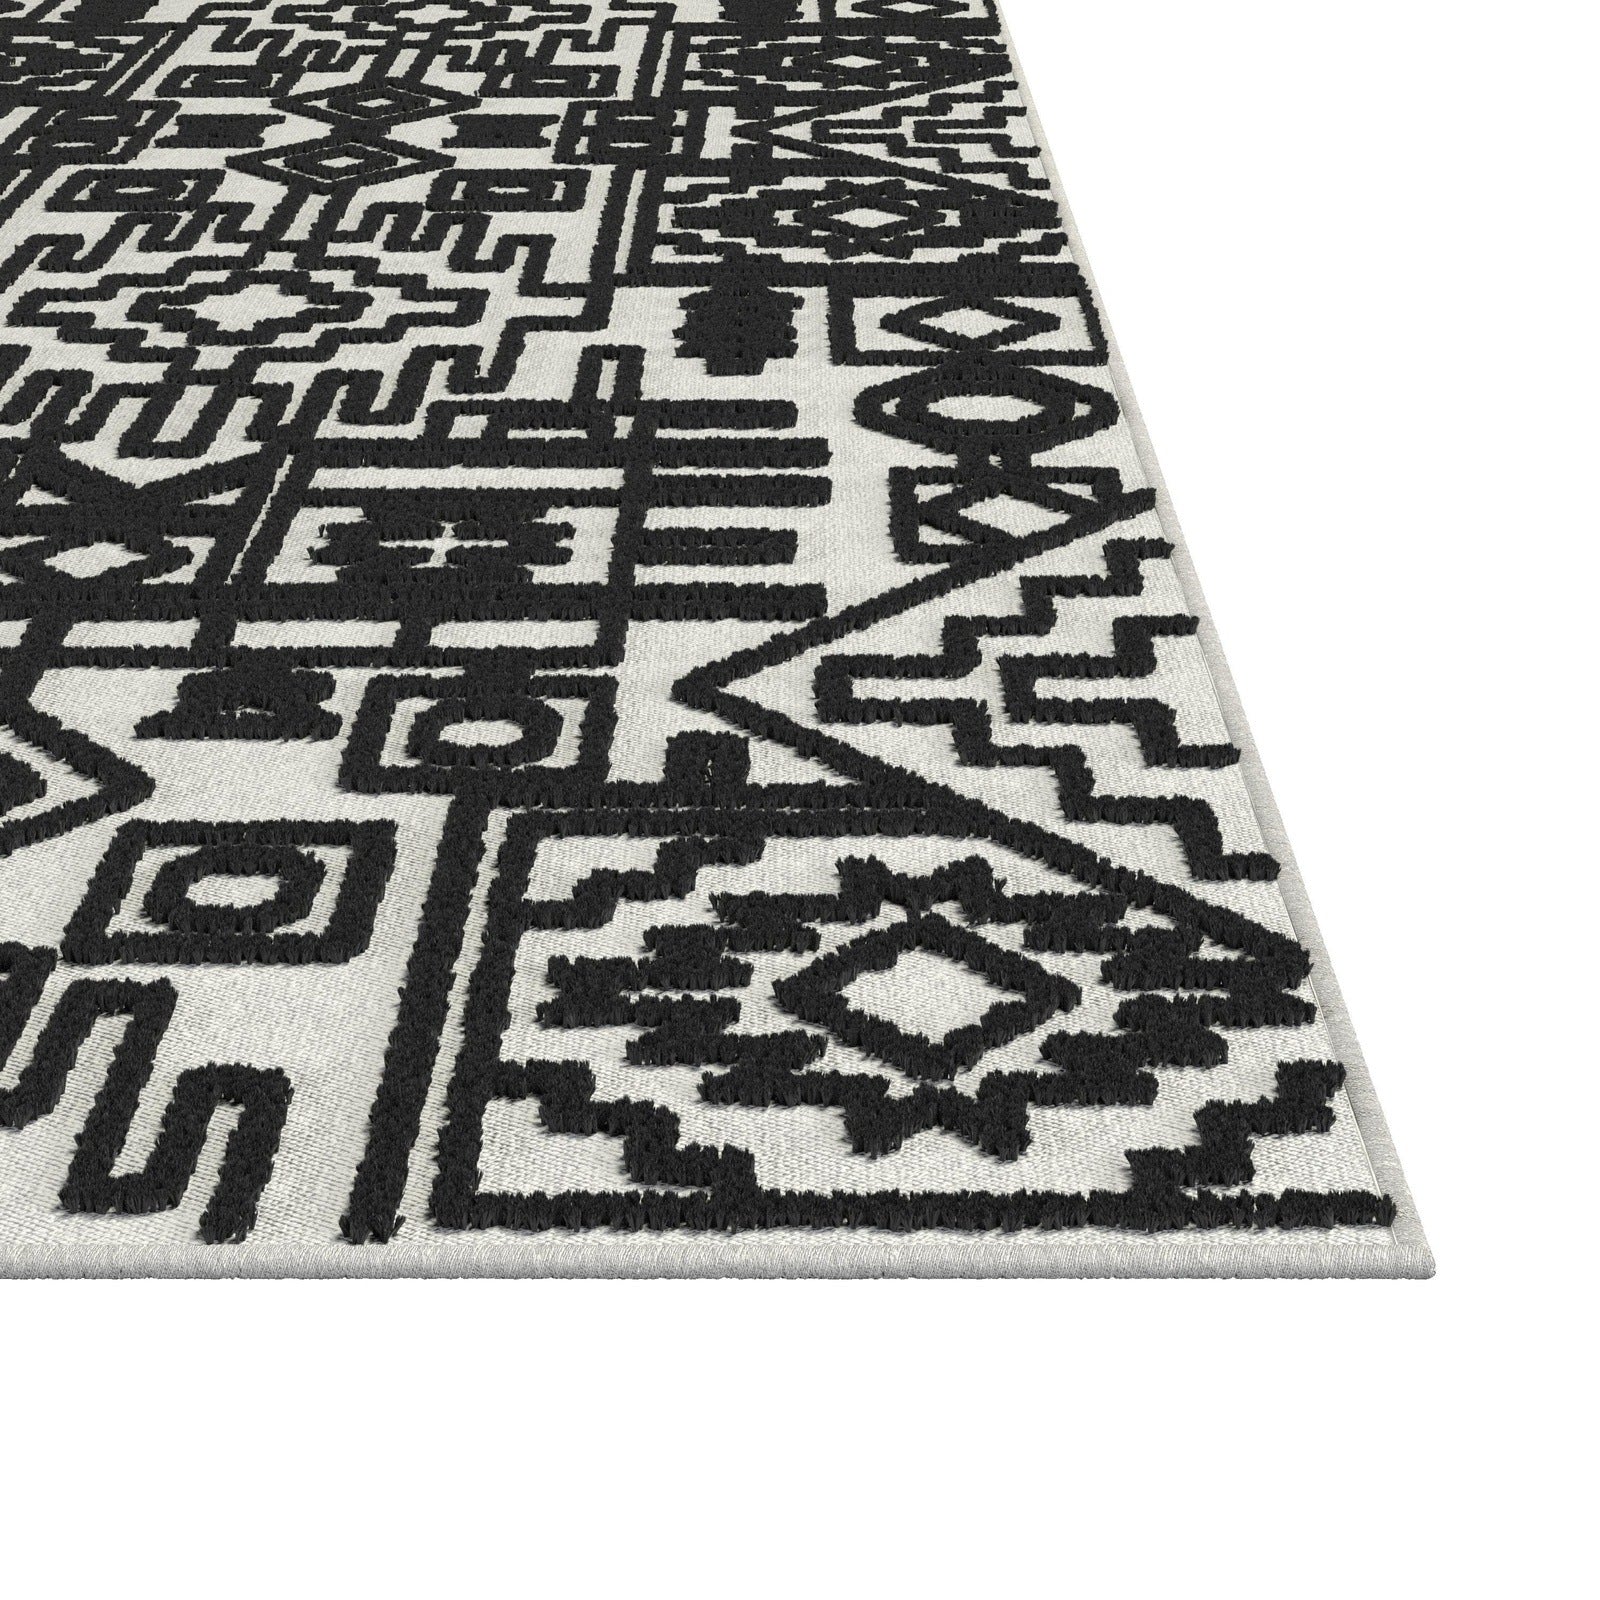 Mercana Ivory and Black Chenille High-Low Area Rug 5x8